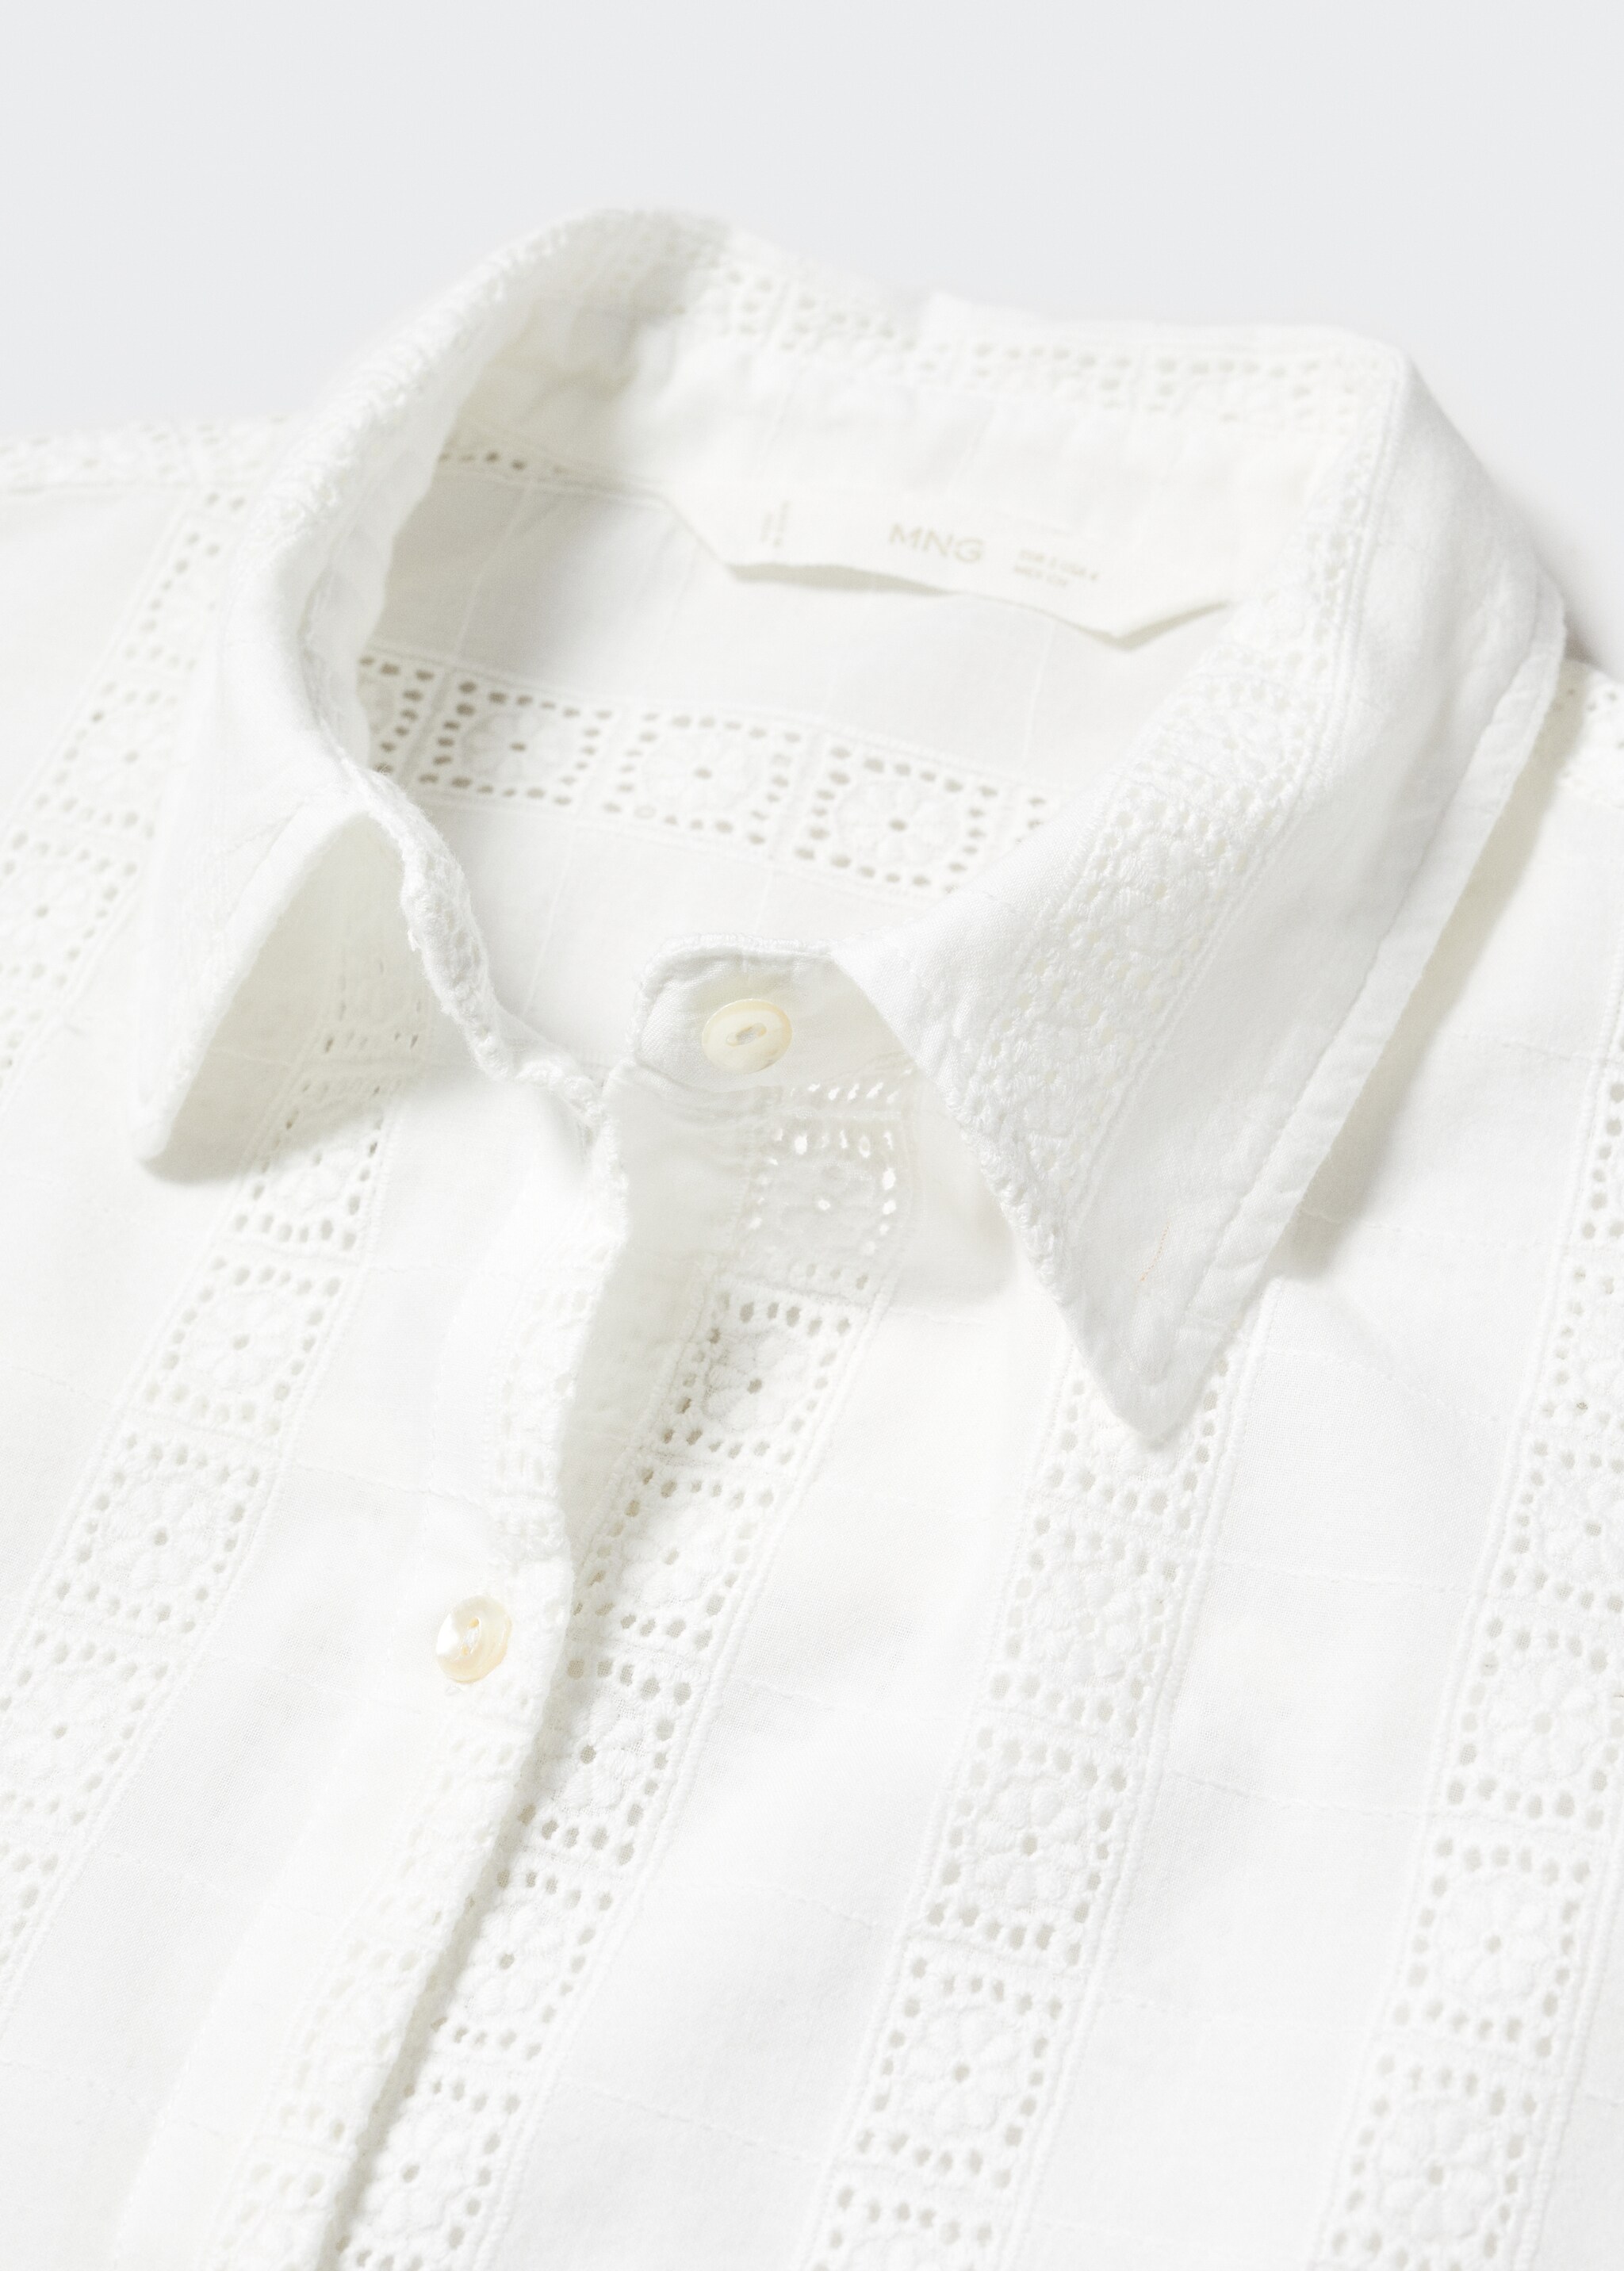 Embroidered cotton shirt - Details of the article 8